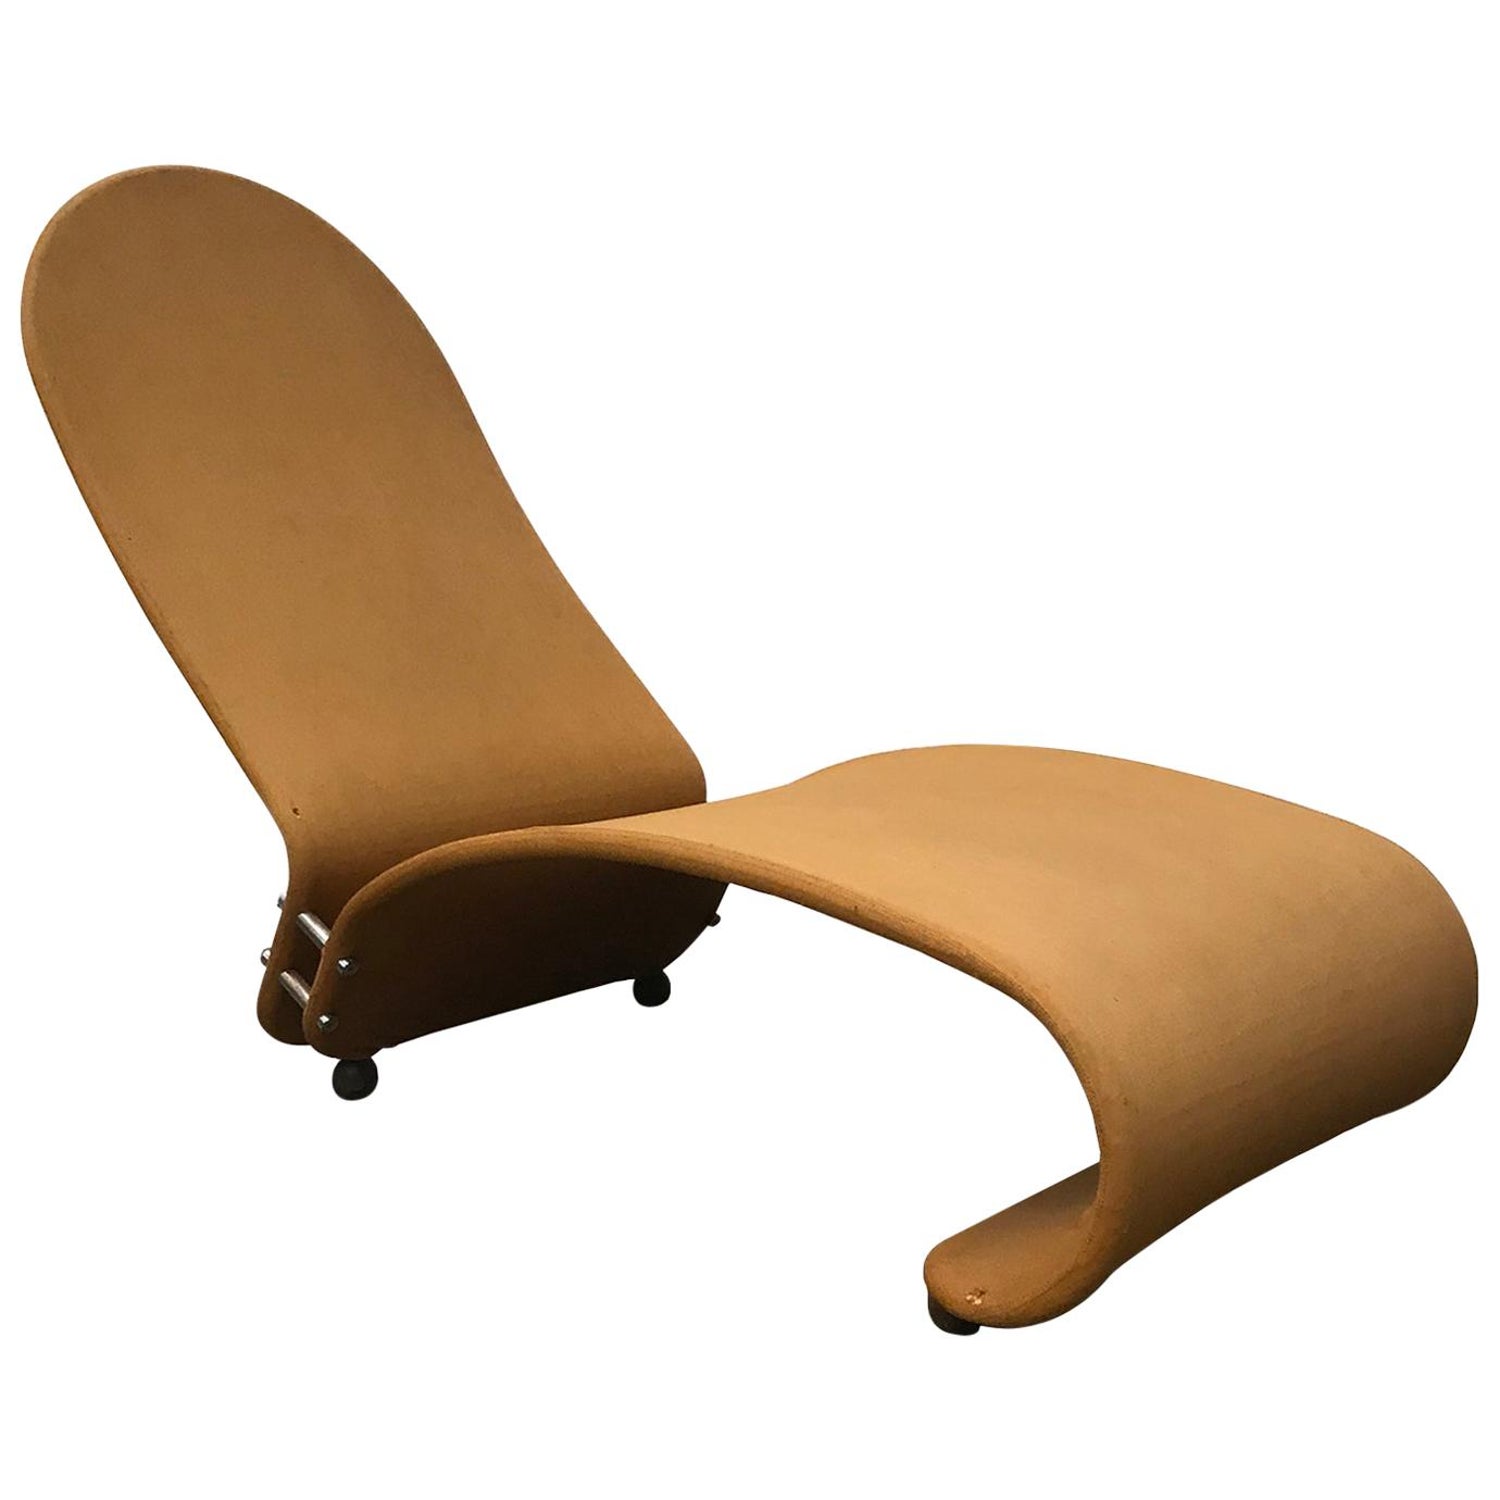 Verner Panton Chaise Longues - 6 For Sale at 1stDibs